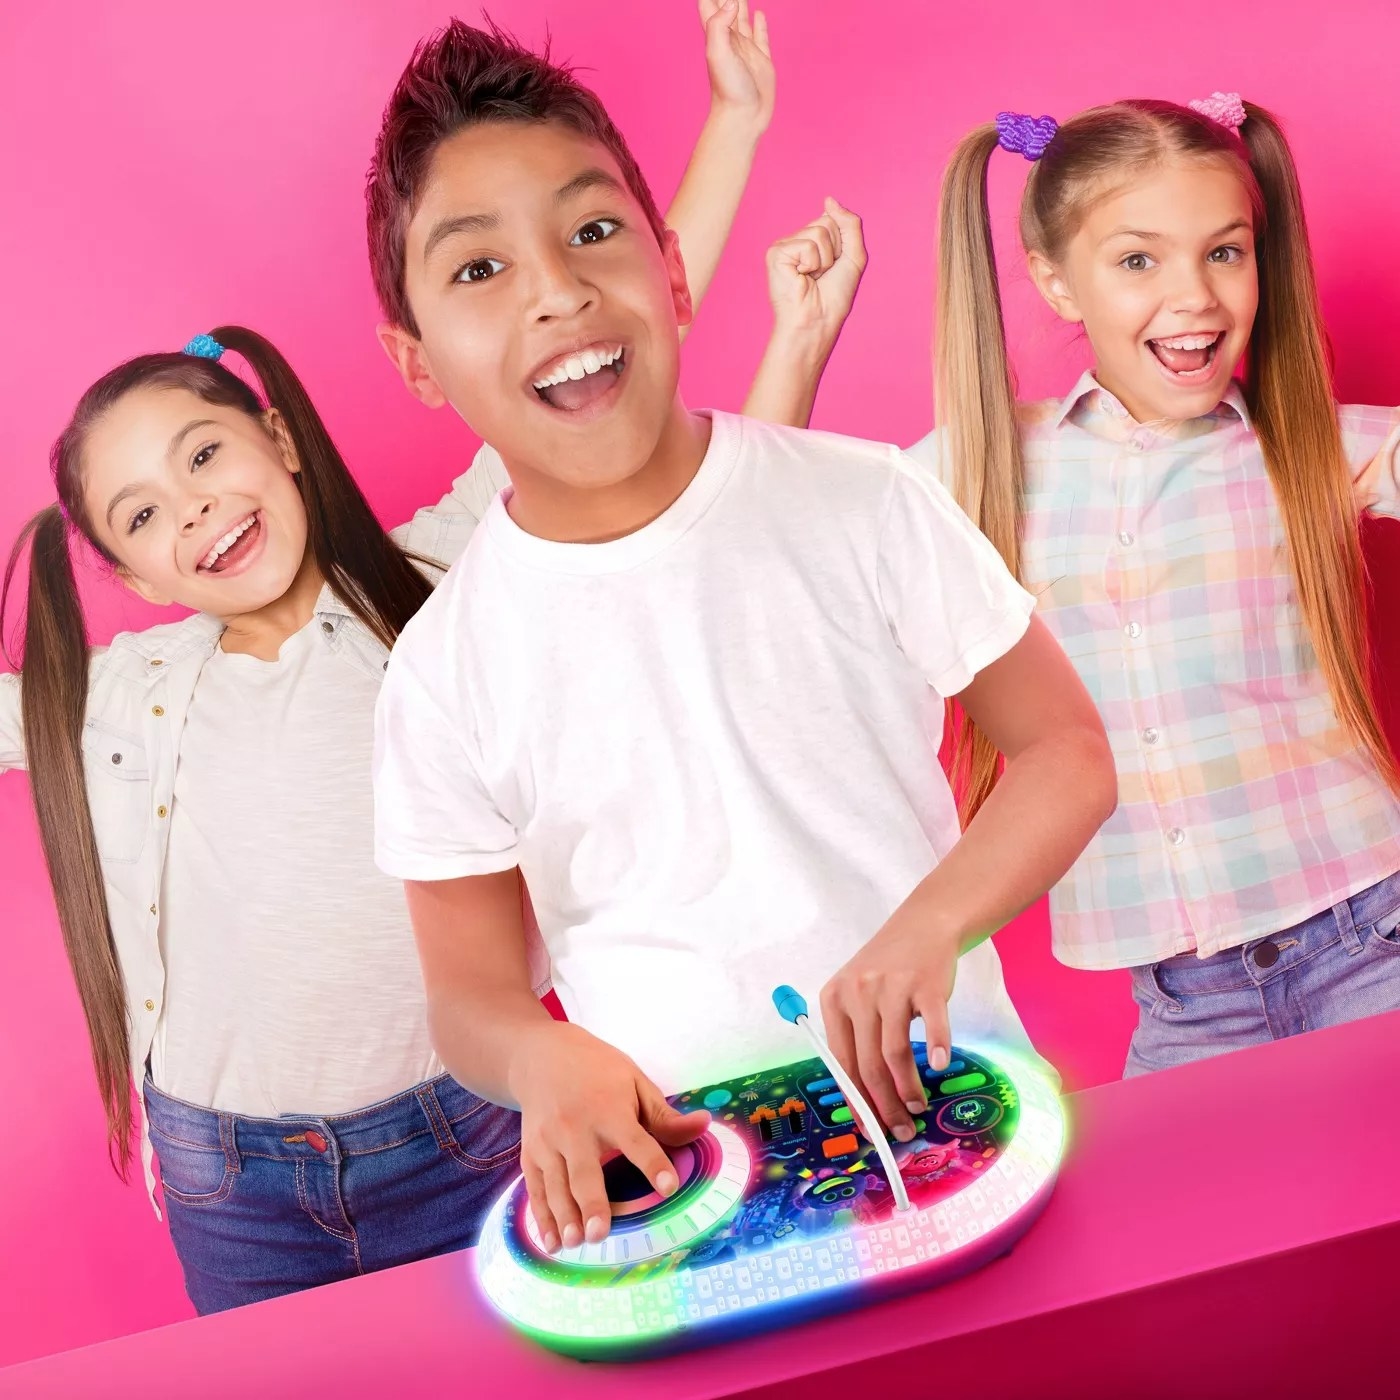 A child playing with the light-up party mixer